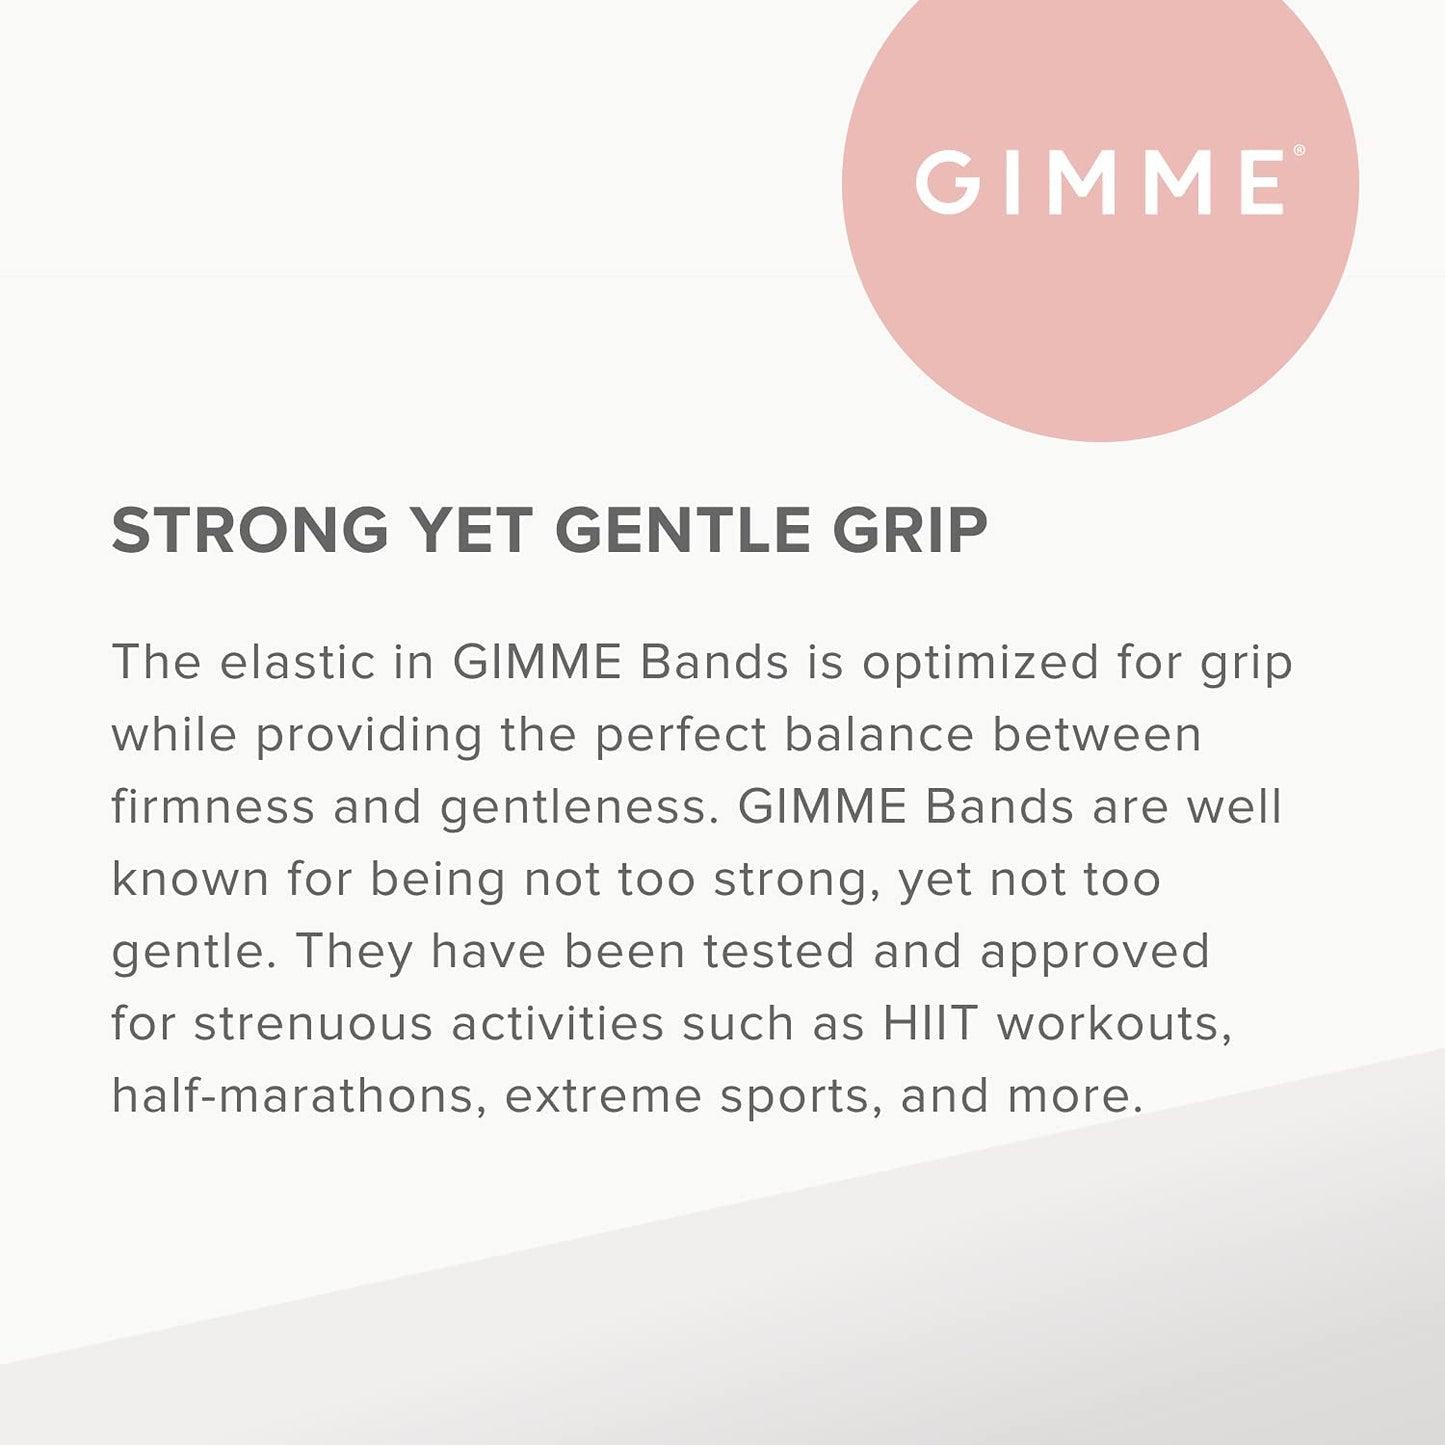 Gimme Beauty - Any Fit No Damage Hair Ties - Black Onyx - Seamless Microfiber Hair Elastic - Hair Accessories With All Day Hold - No Snagging, Dents, or Breakage Hair Tie Pack (9 Count)